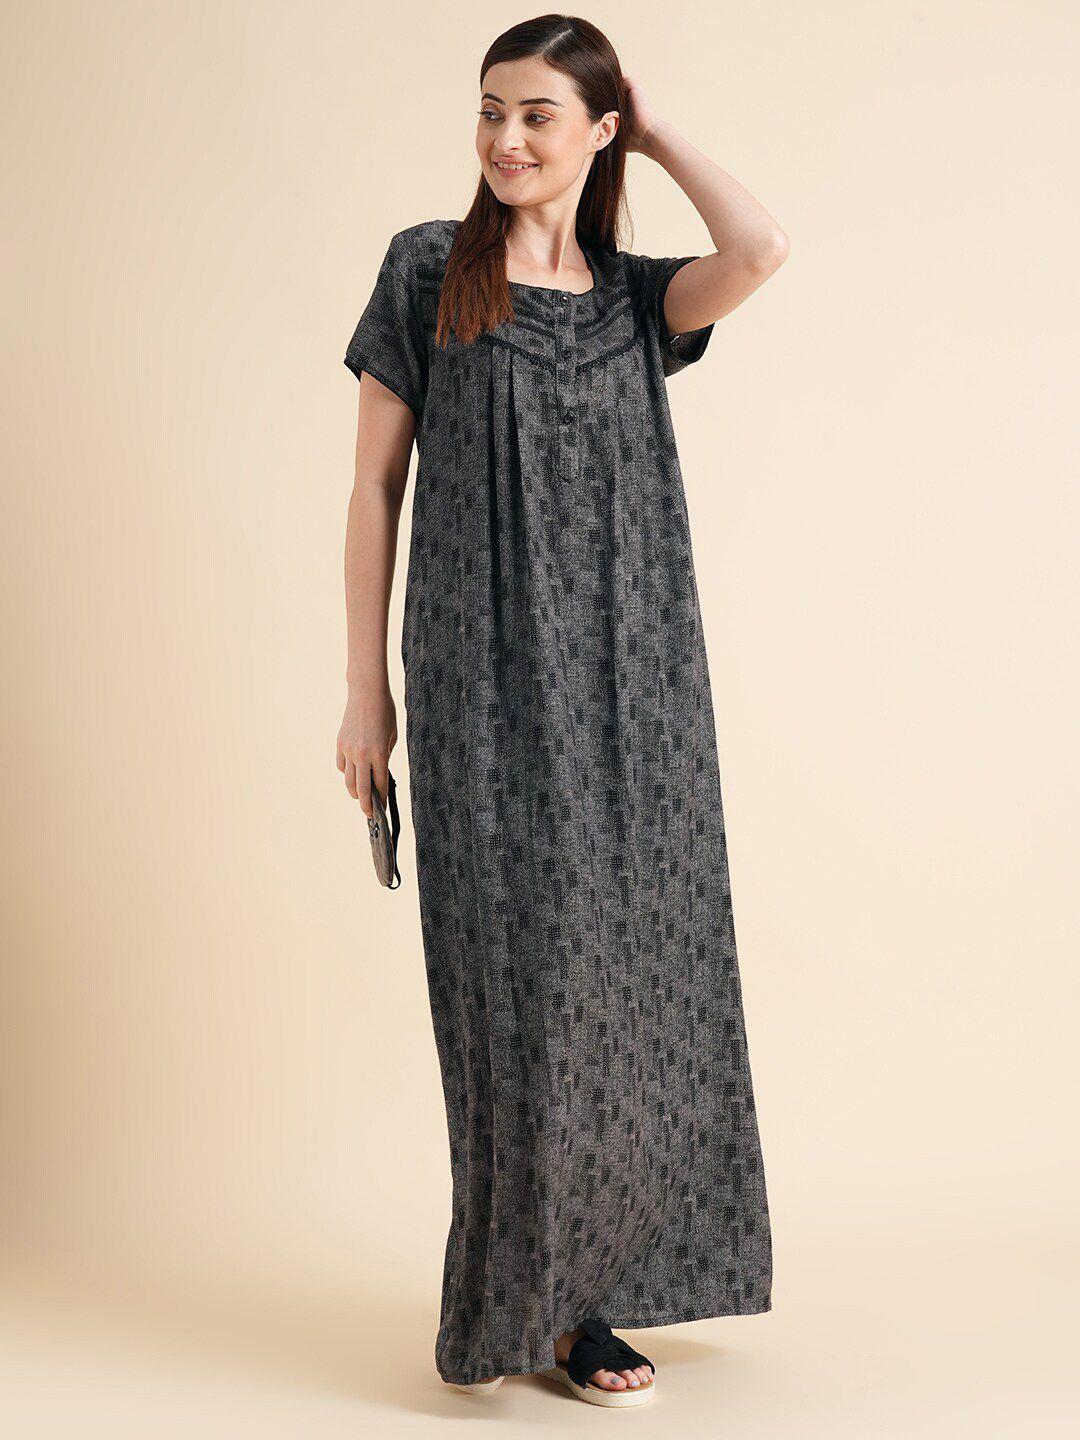 sweet dreams black abstact printed pure cotton maxi nightdress